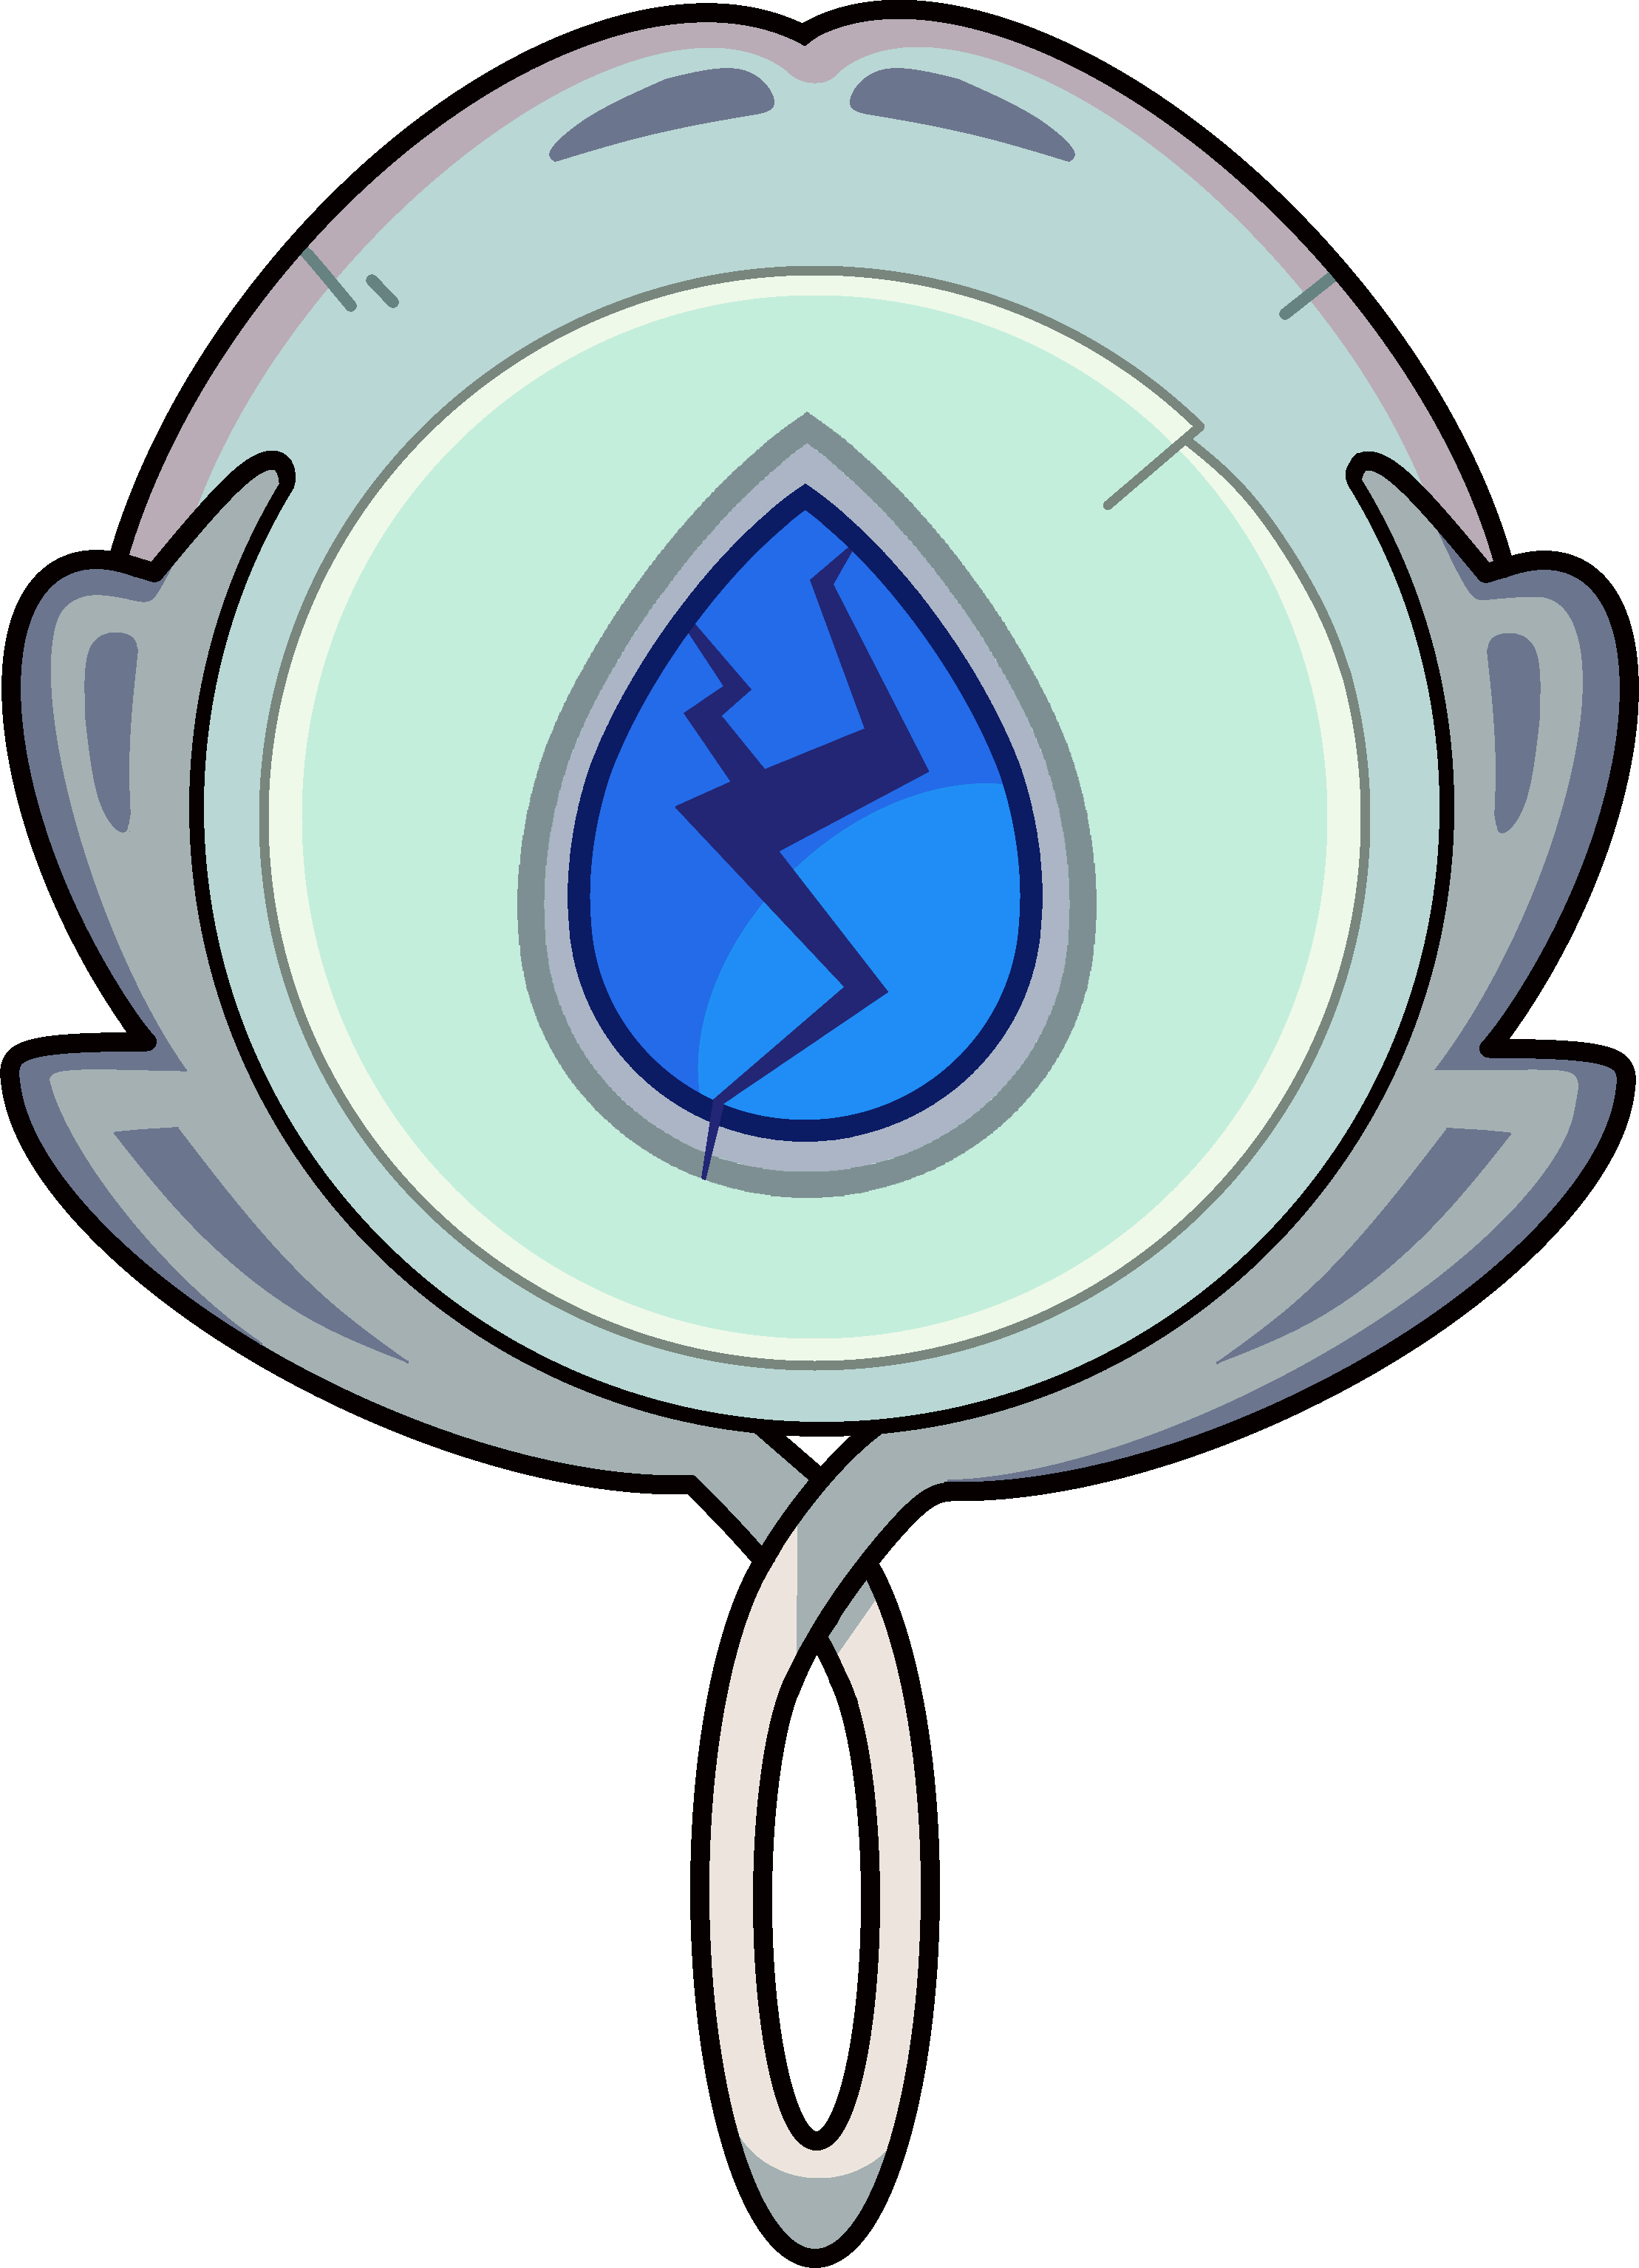 Whip clipart cracked. The mirror steven universe